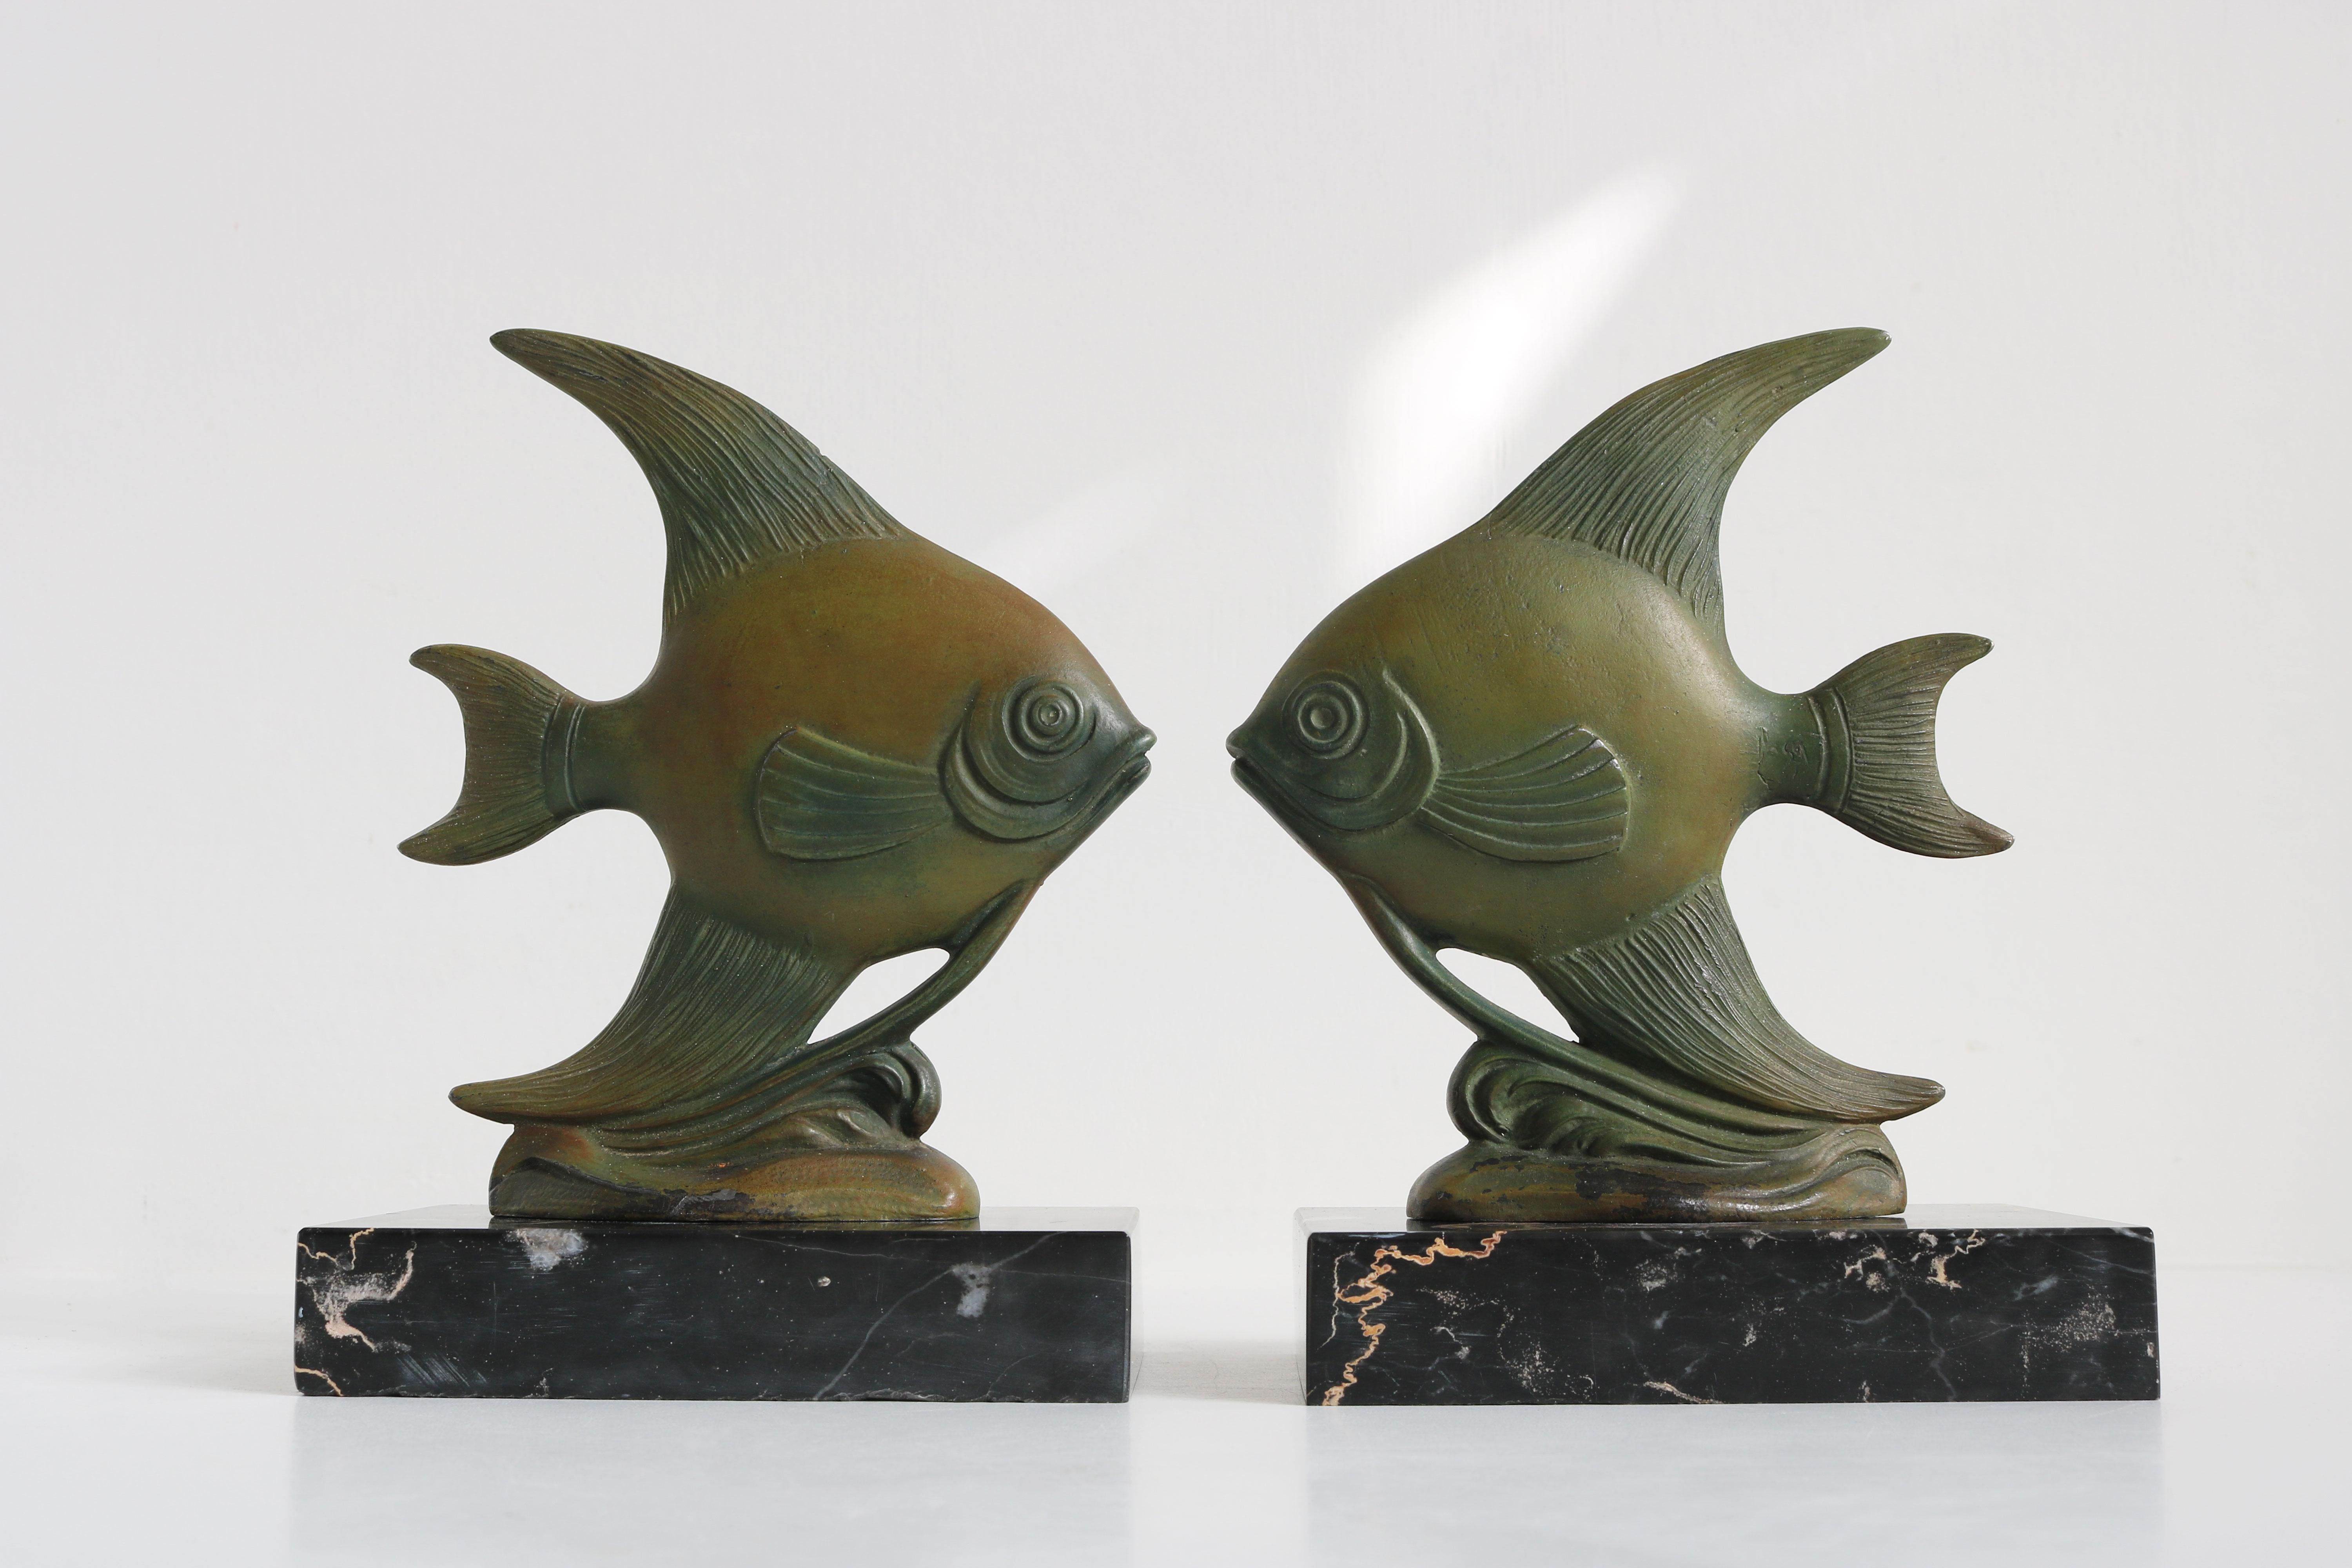 Stylish & Timeless! These French Art Deco Angelfish bookends from the 1930s. 
Marvelous Art Deco design with the right patina and feel to them. 
The Angel fish are styled perfectly in the Art Deco design style and are displayed on gorgeous black